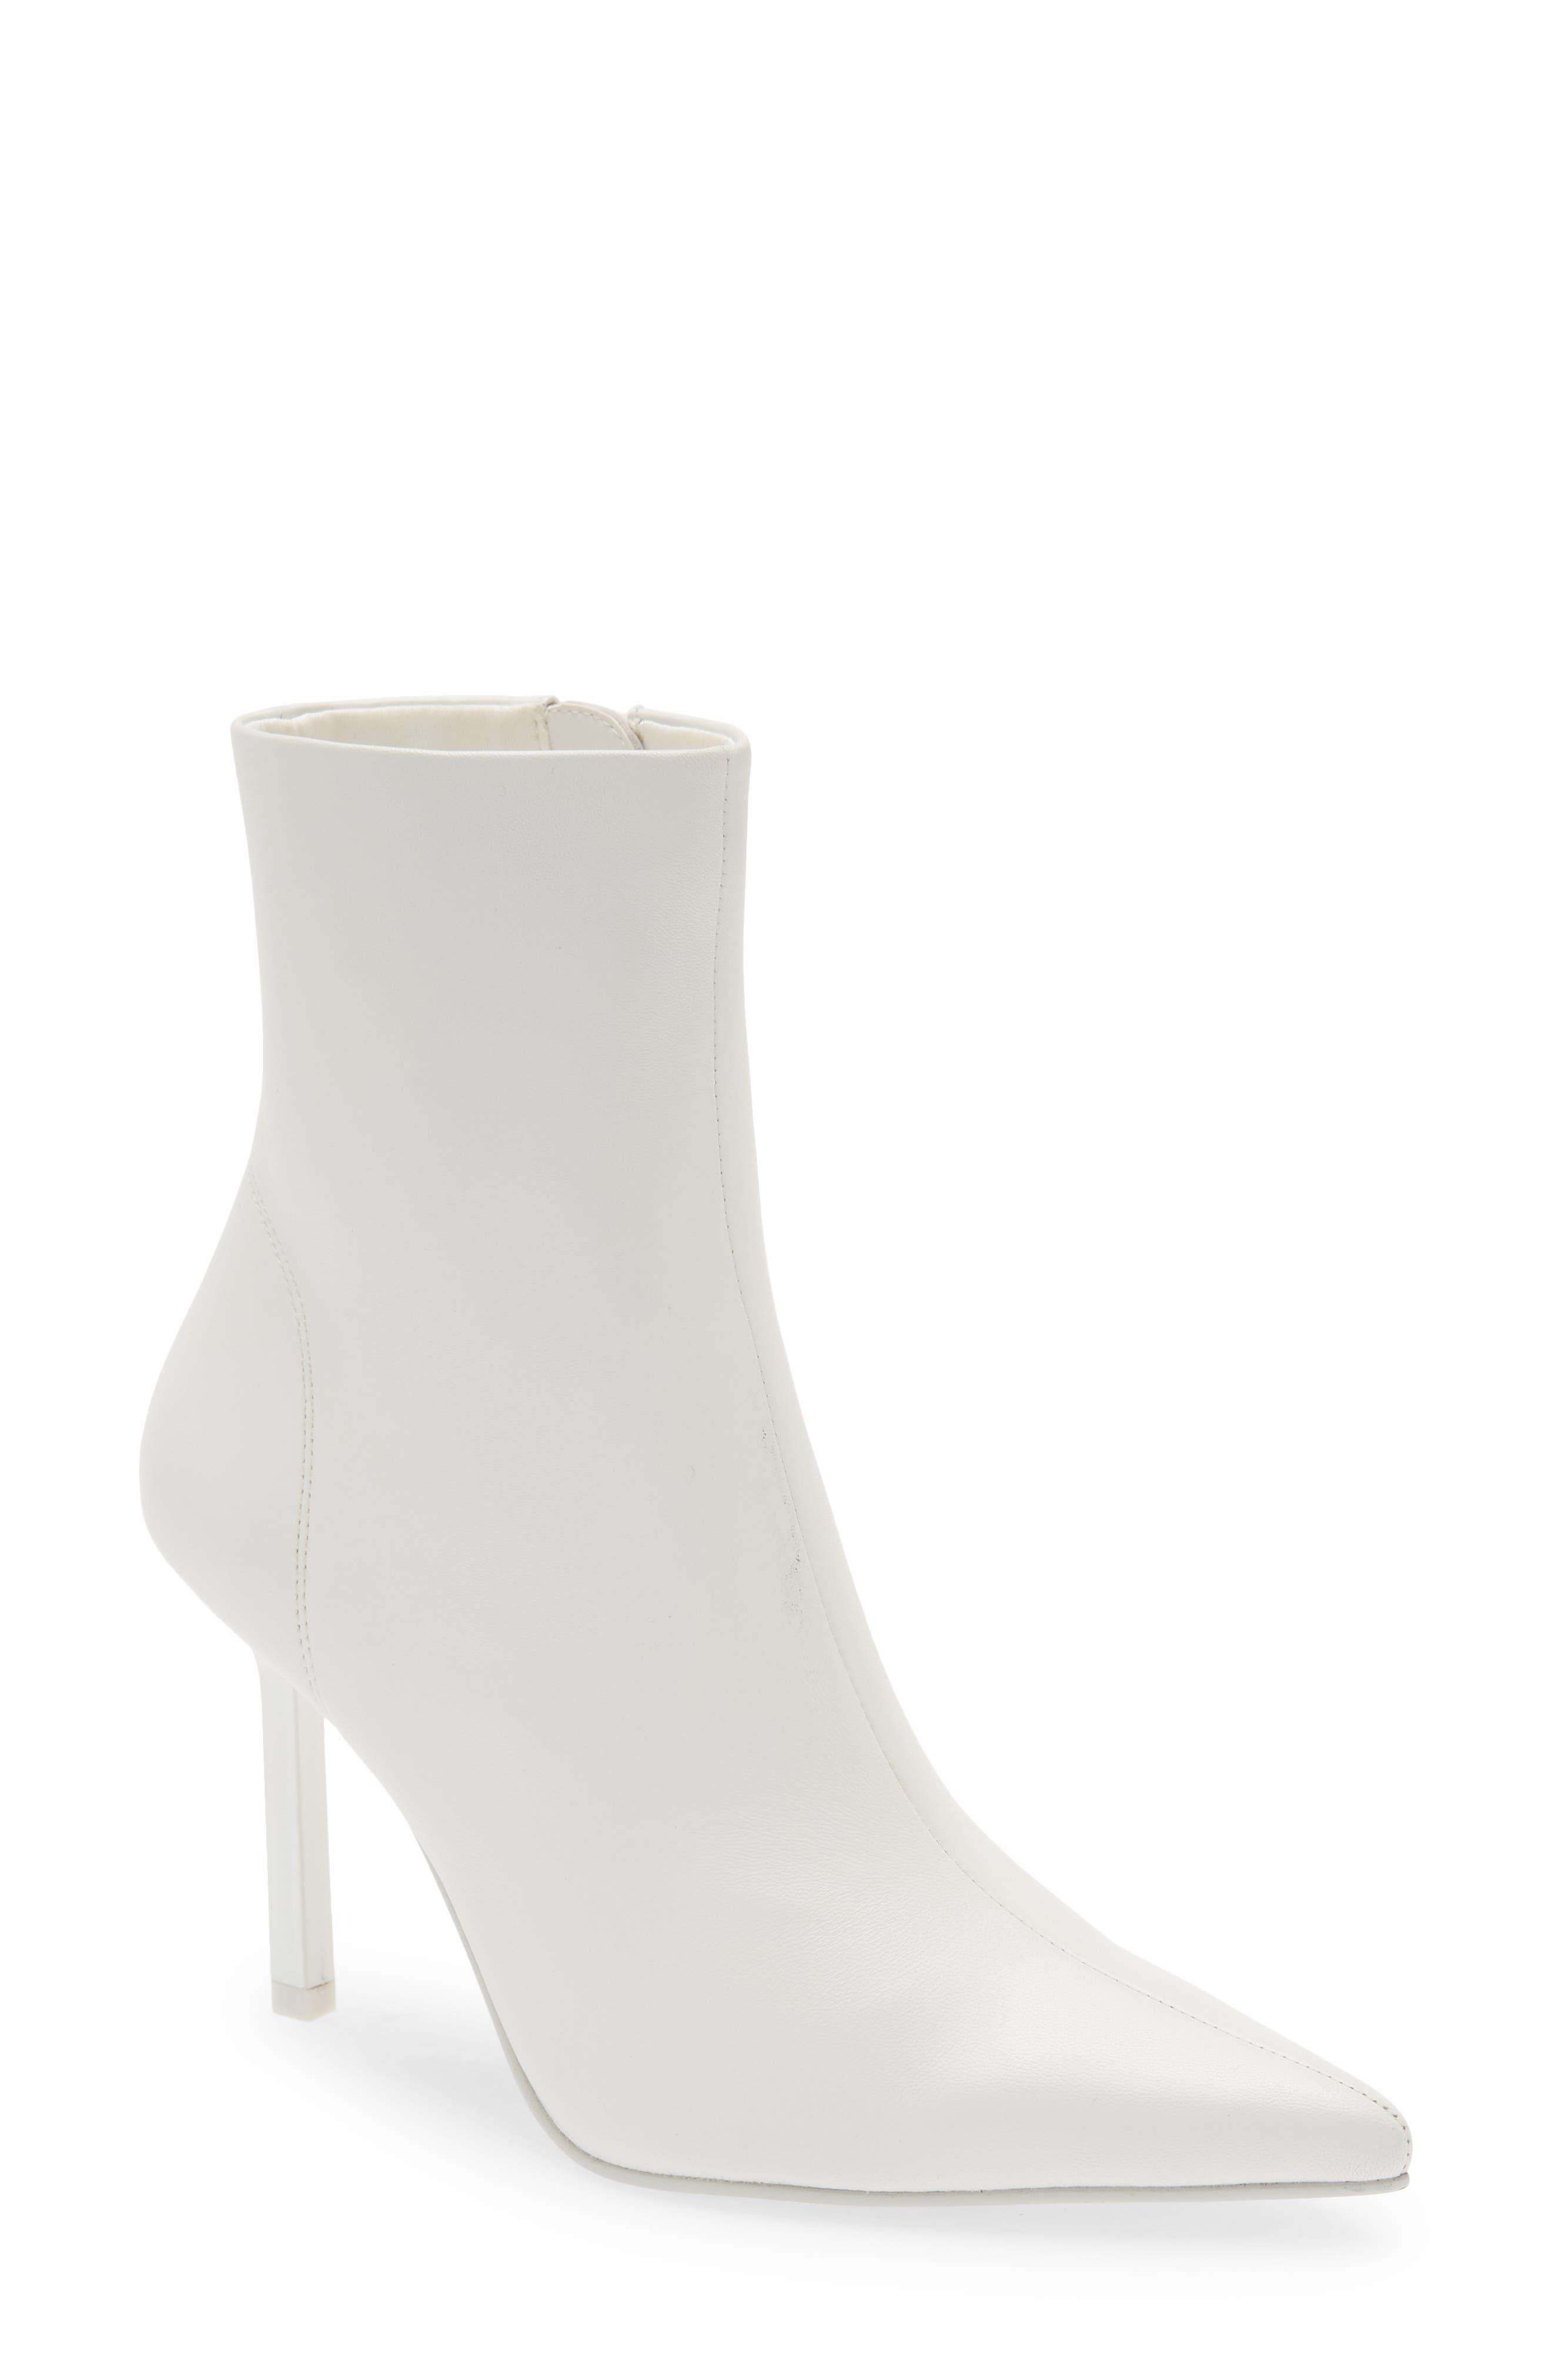 Steve Madden Elysia Pointed Toe Bootie in White | Lyst